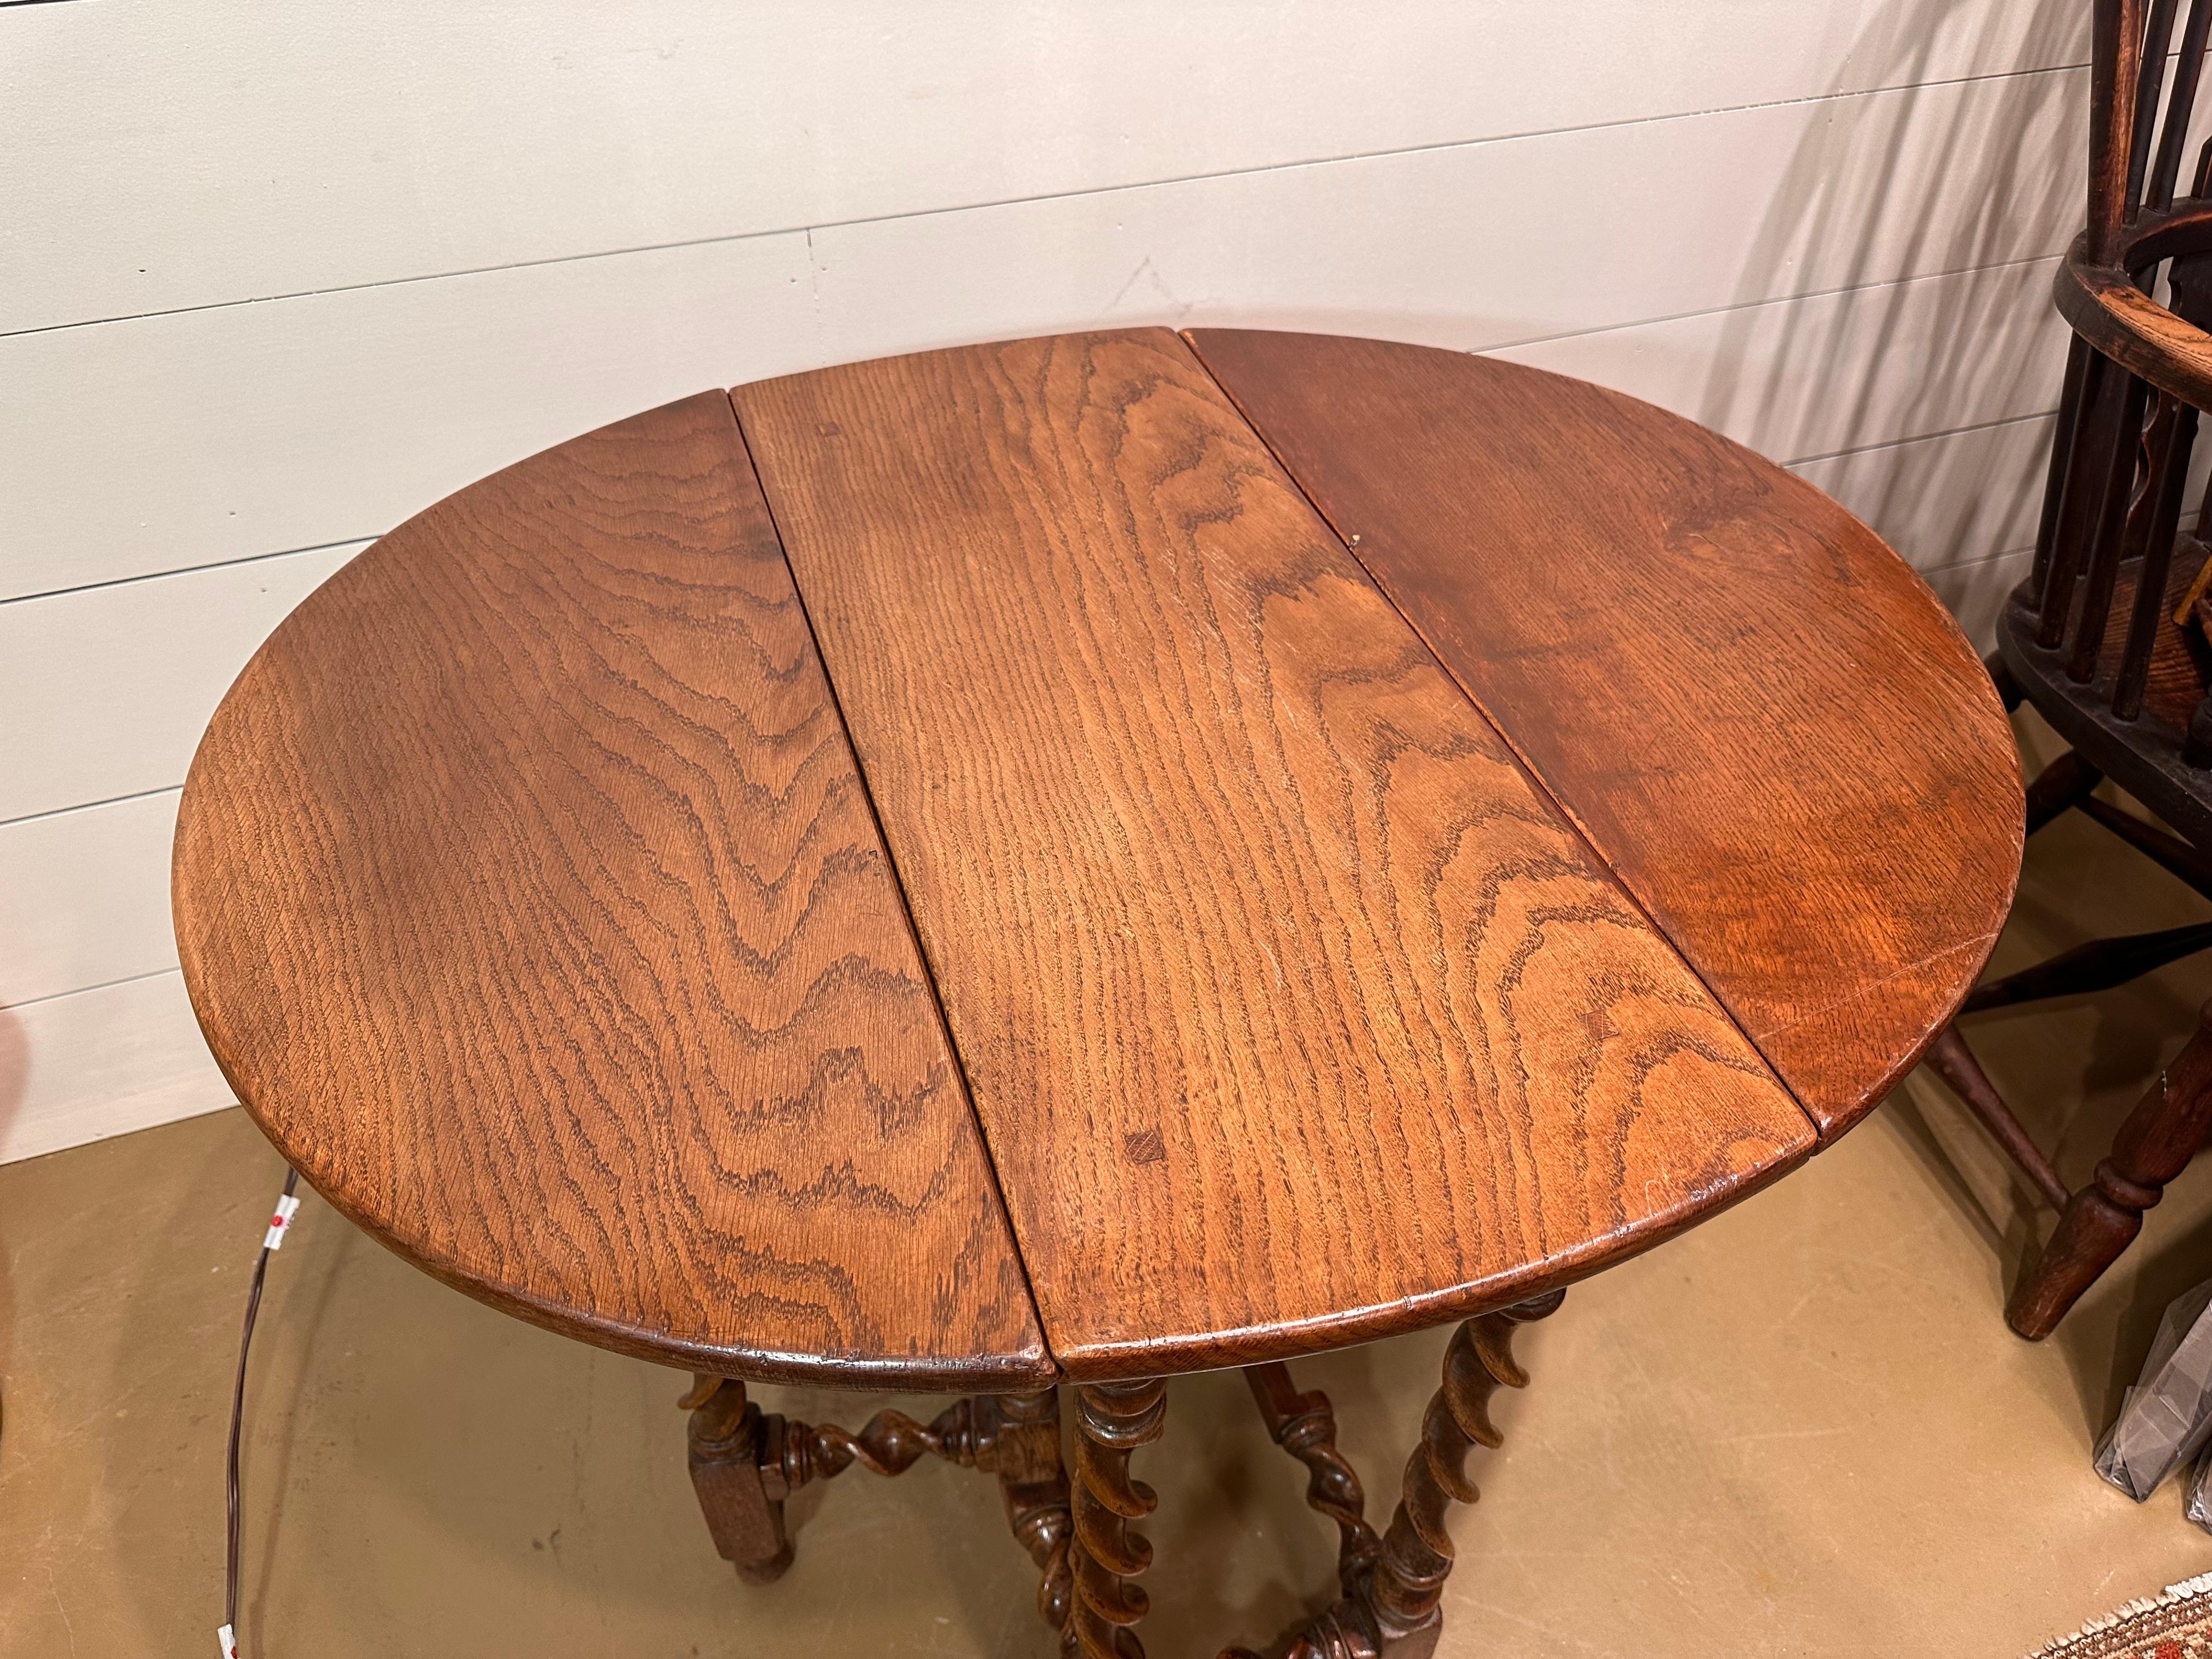 This charming 19th-century English gate leg table embodies a timeless design and practical elegance. Crafted with deep and rich wood, it unfolds to reveal a spacious surface, perfect for both everyday meals and special gatherings or even as an